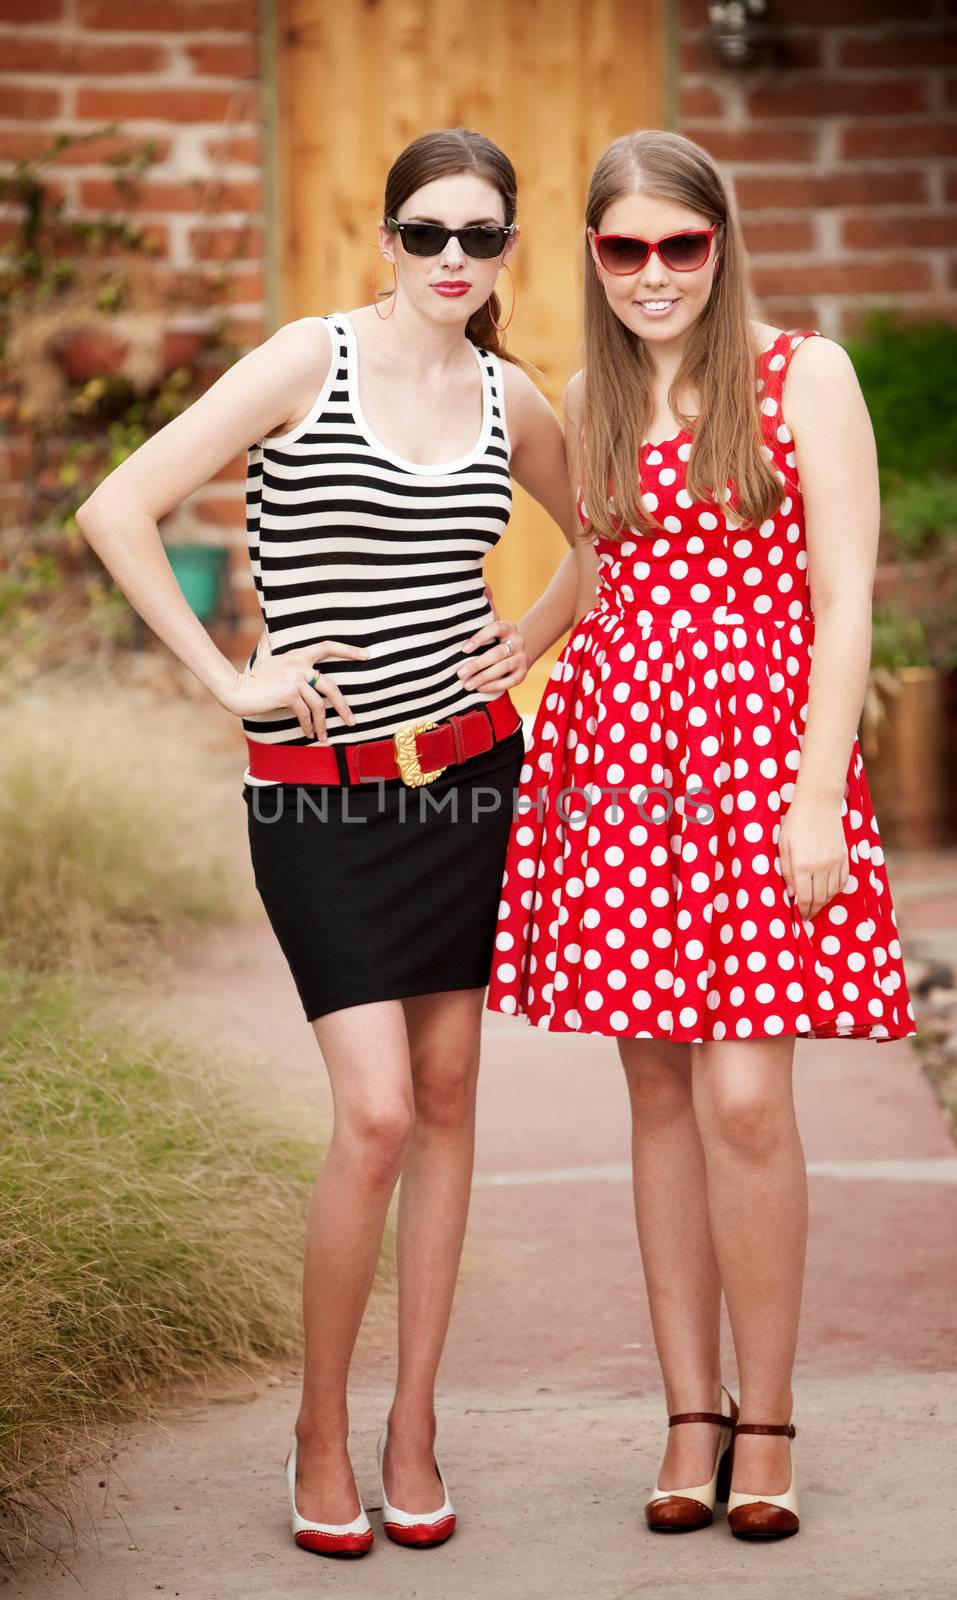 Fashion Girls on Walkway in front of House